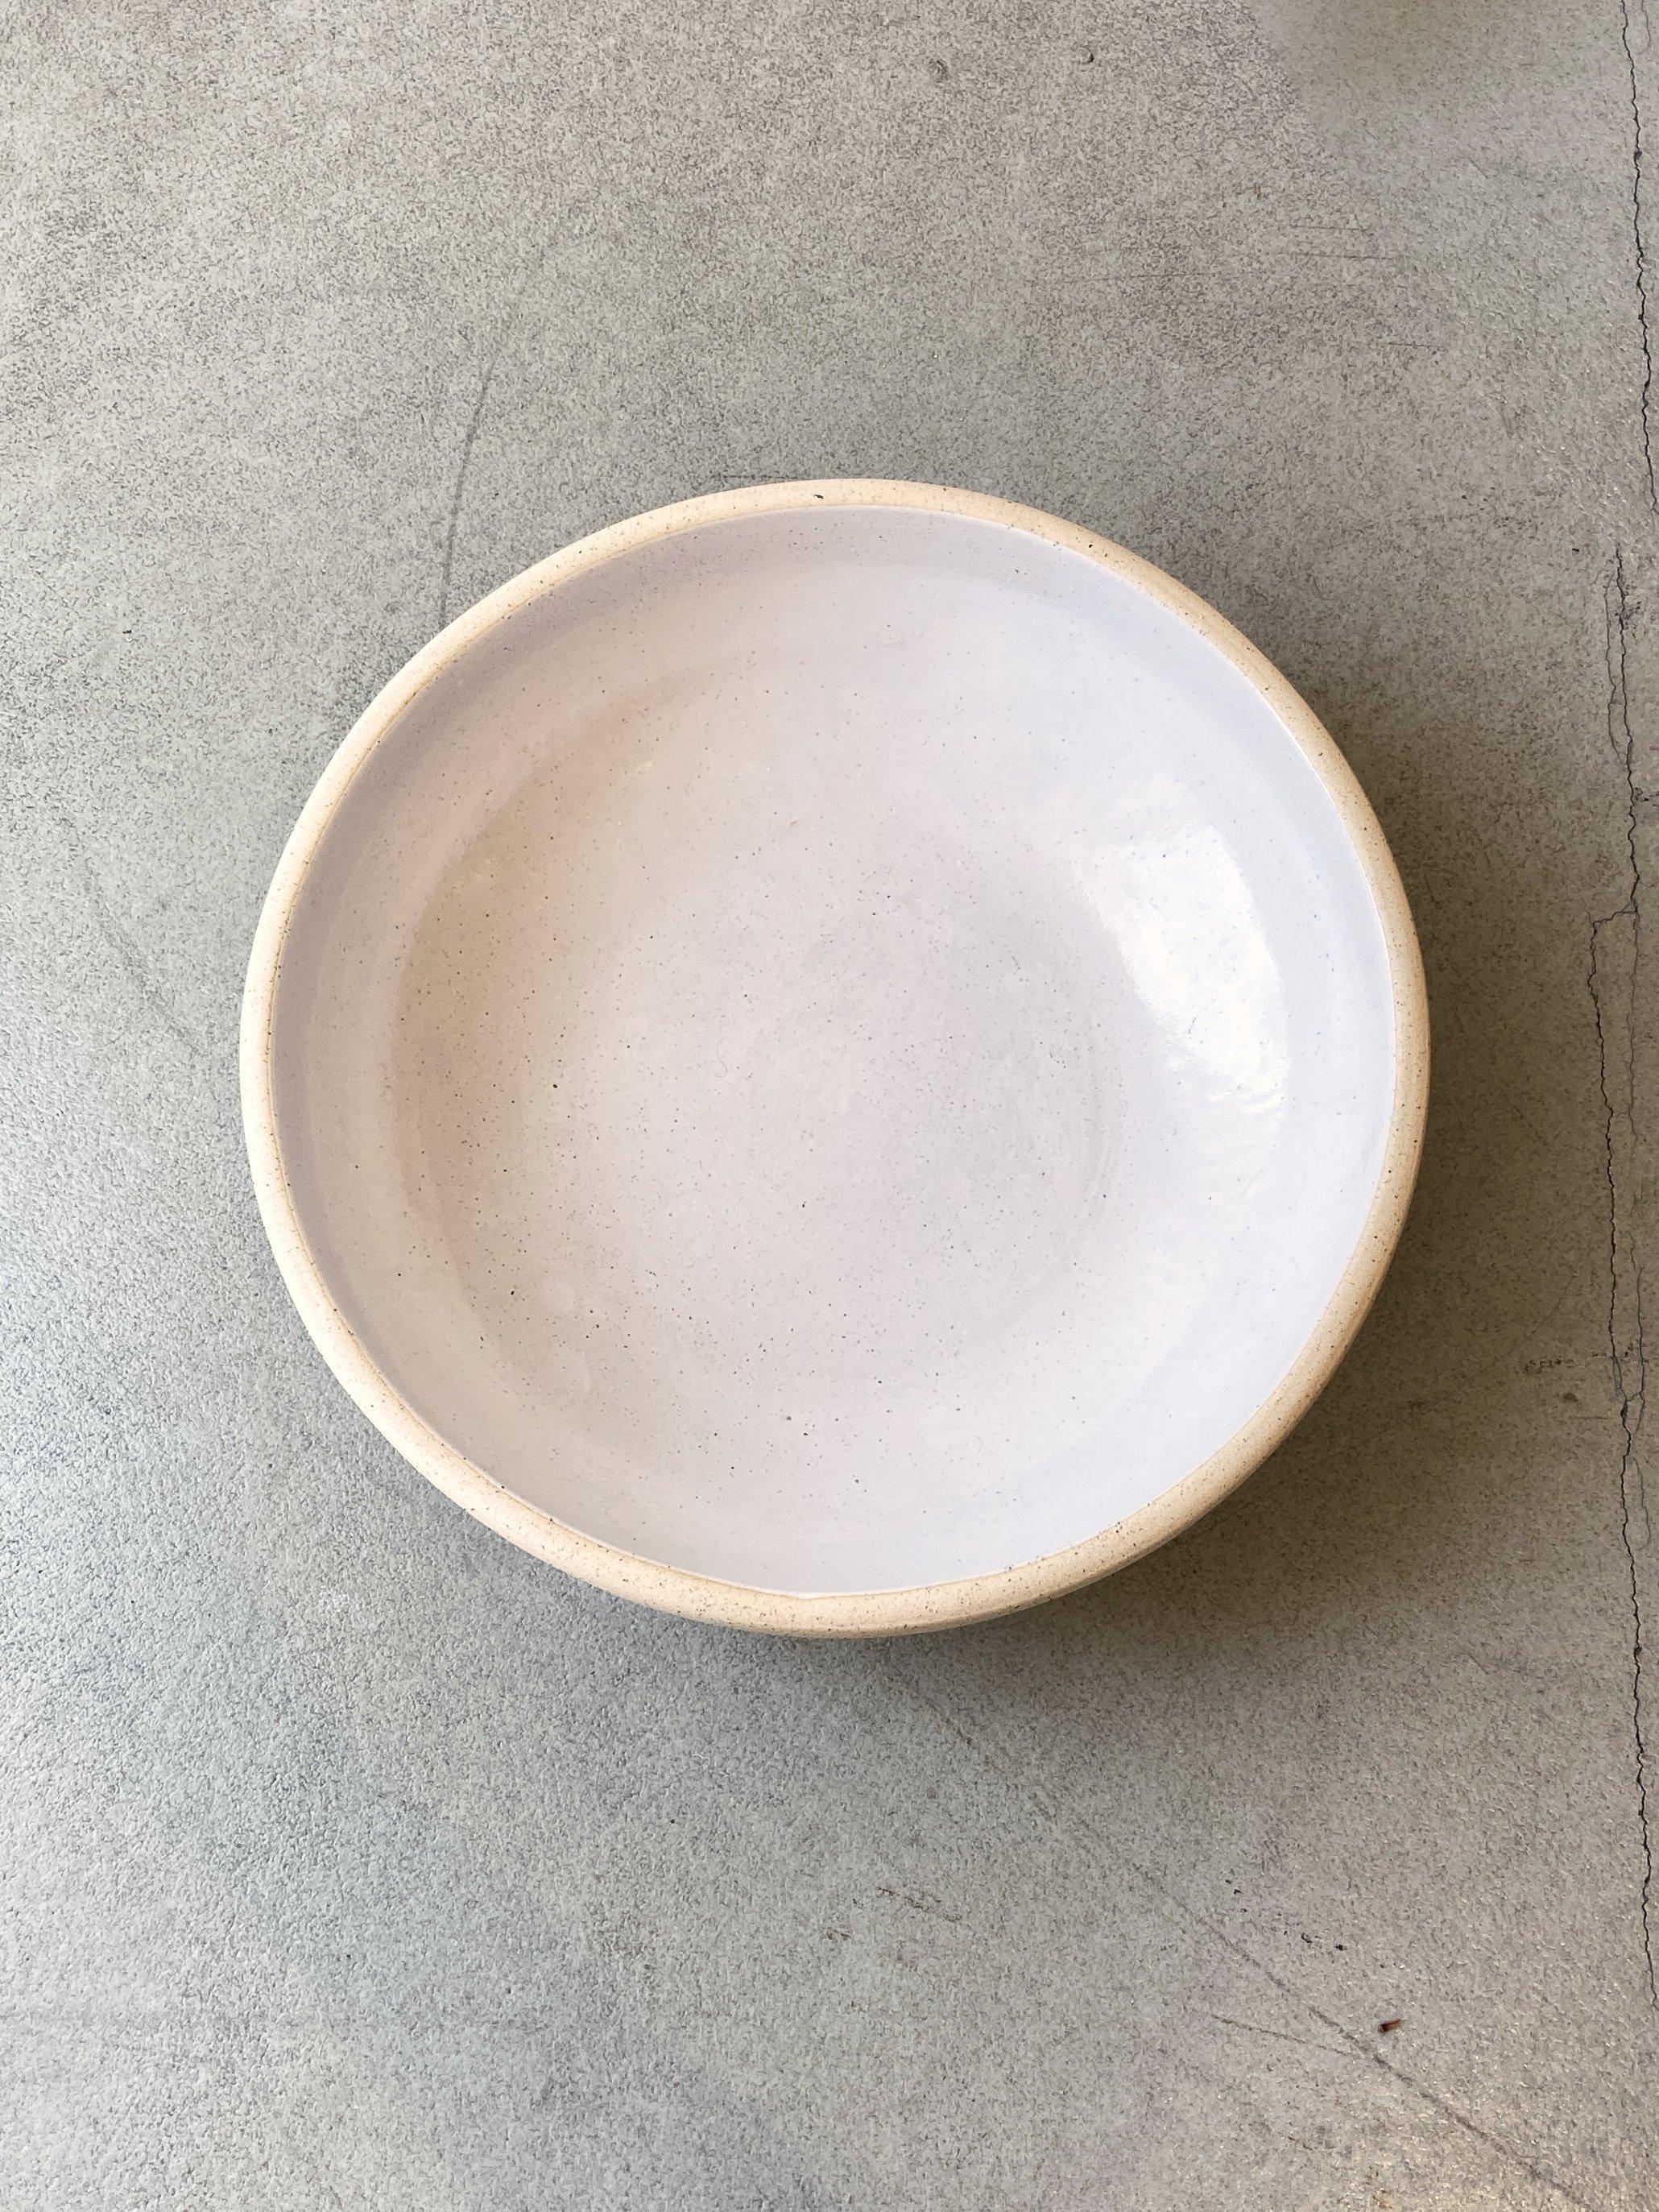 A large stoneware bowl with an ivory glaze inside for serving soups, sides, or main courses at your next dinner party. 

Handmade dinnerware from Tlaquepaque, Jalisco, Mexico, by a family of ceramicists that have been creating handmade earthenware